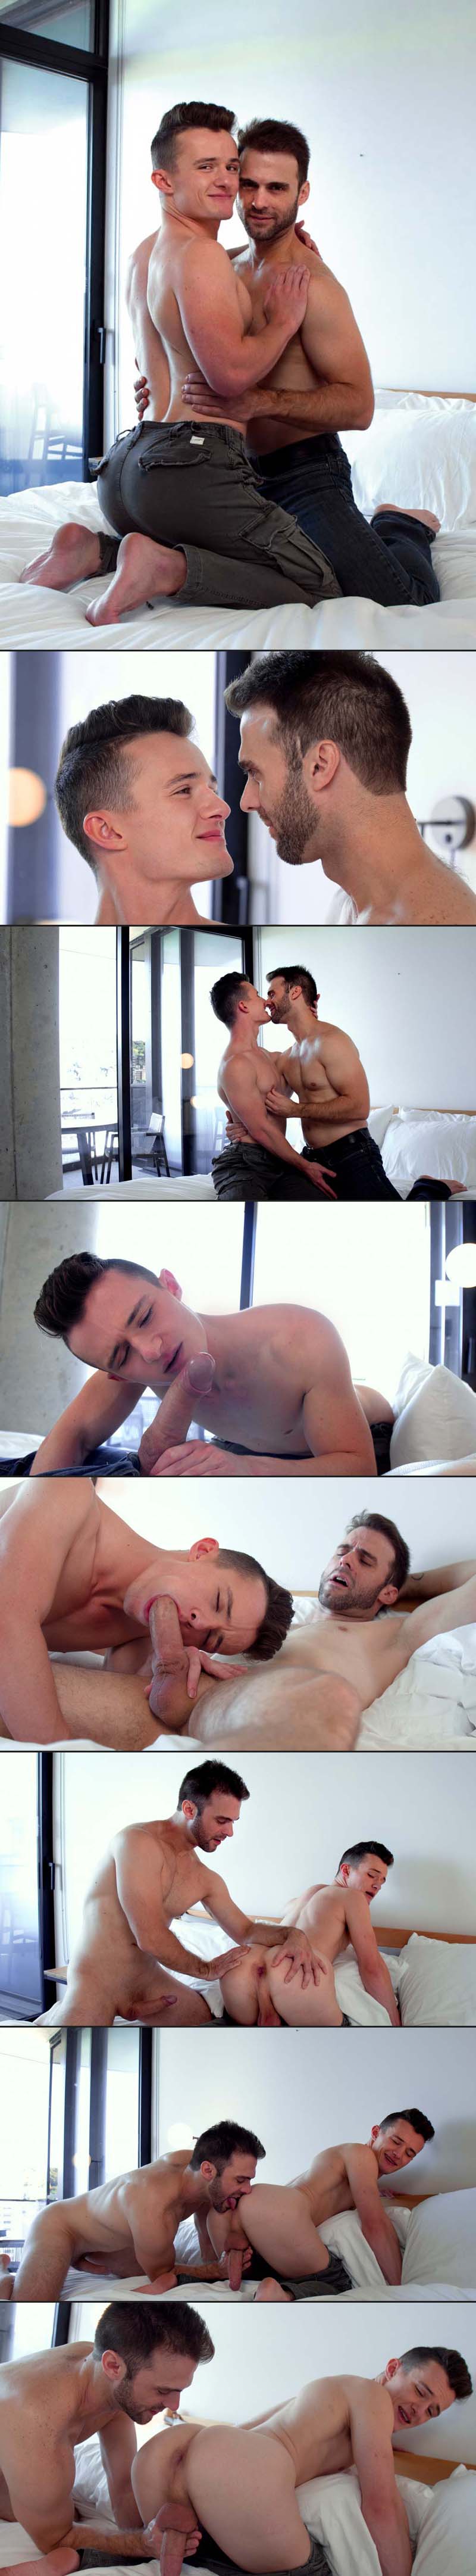 Grant Ducati Gets 'Clark'd' by Gabriel Clark at CockyBoys